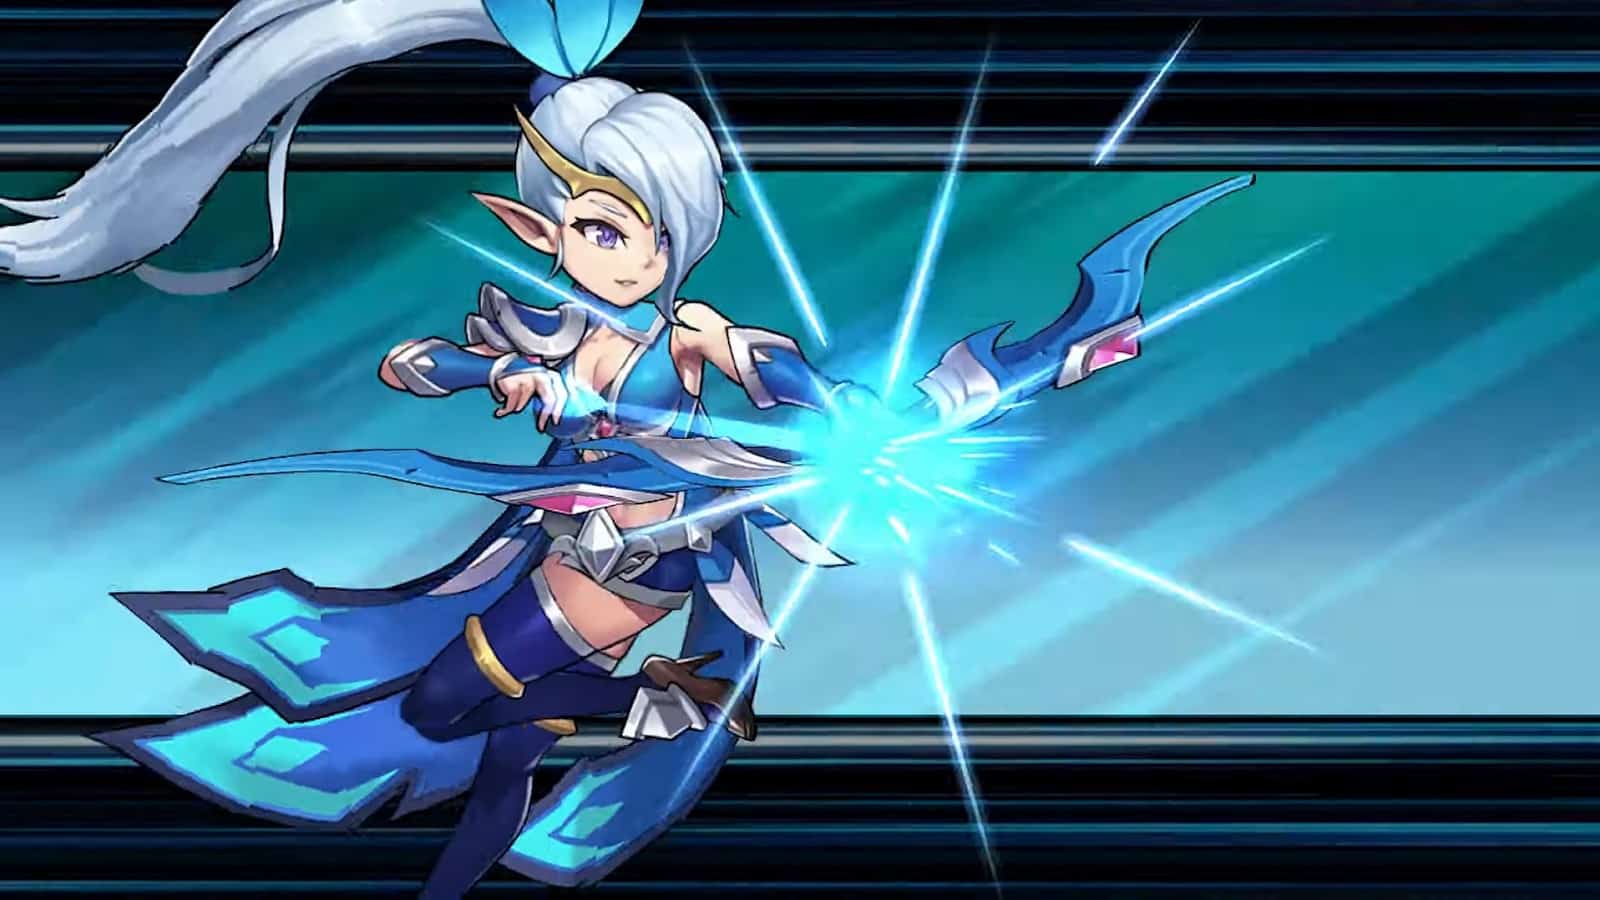 Miya's appearance in Mobile legends adventure